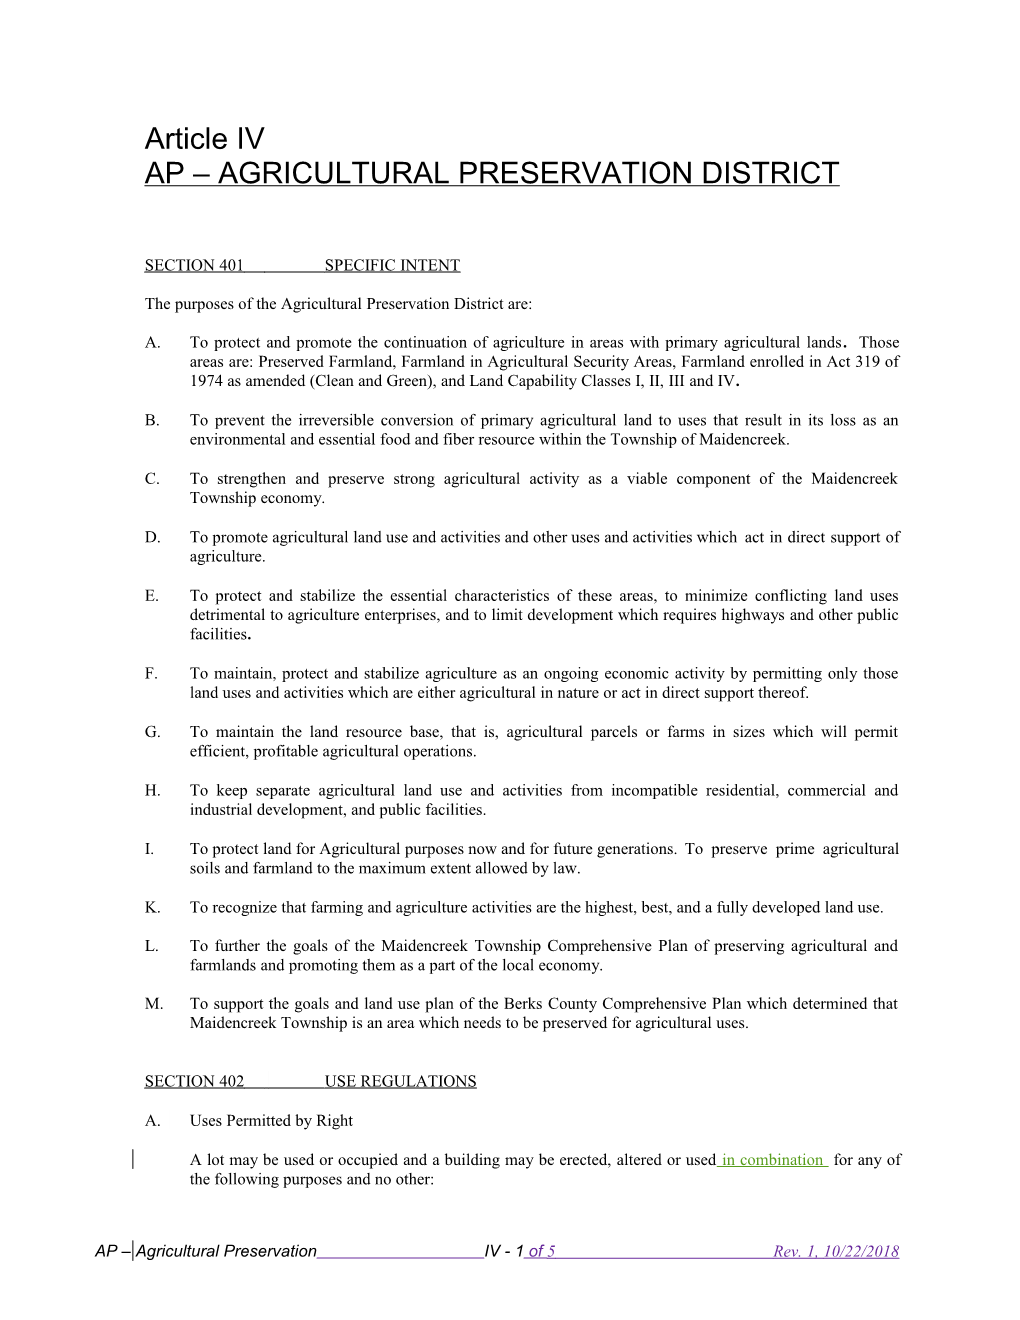 The Purposes of the Agricultural Preservation District Are